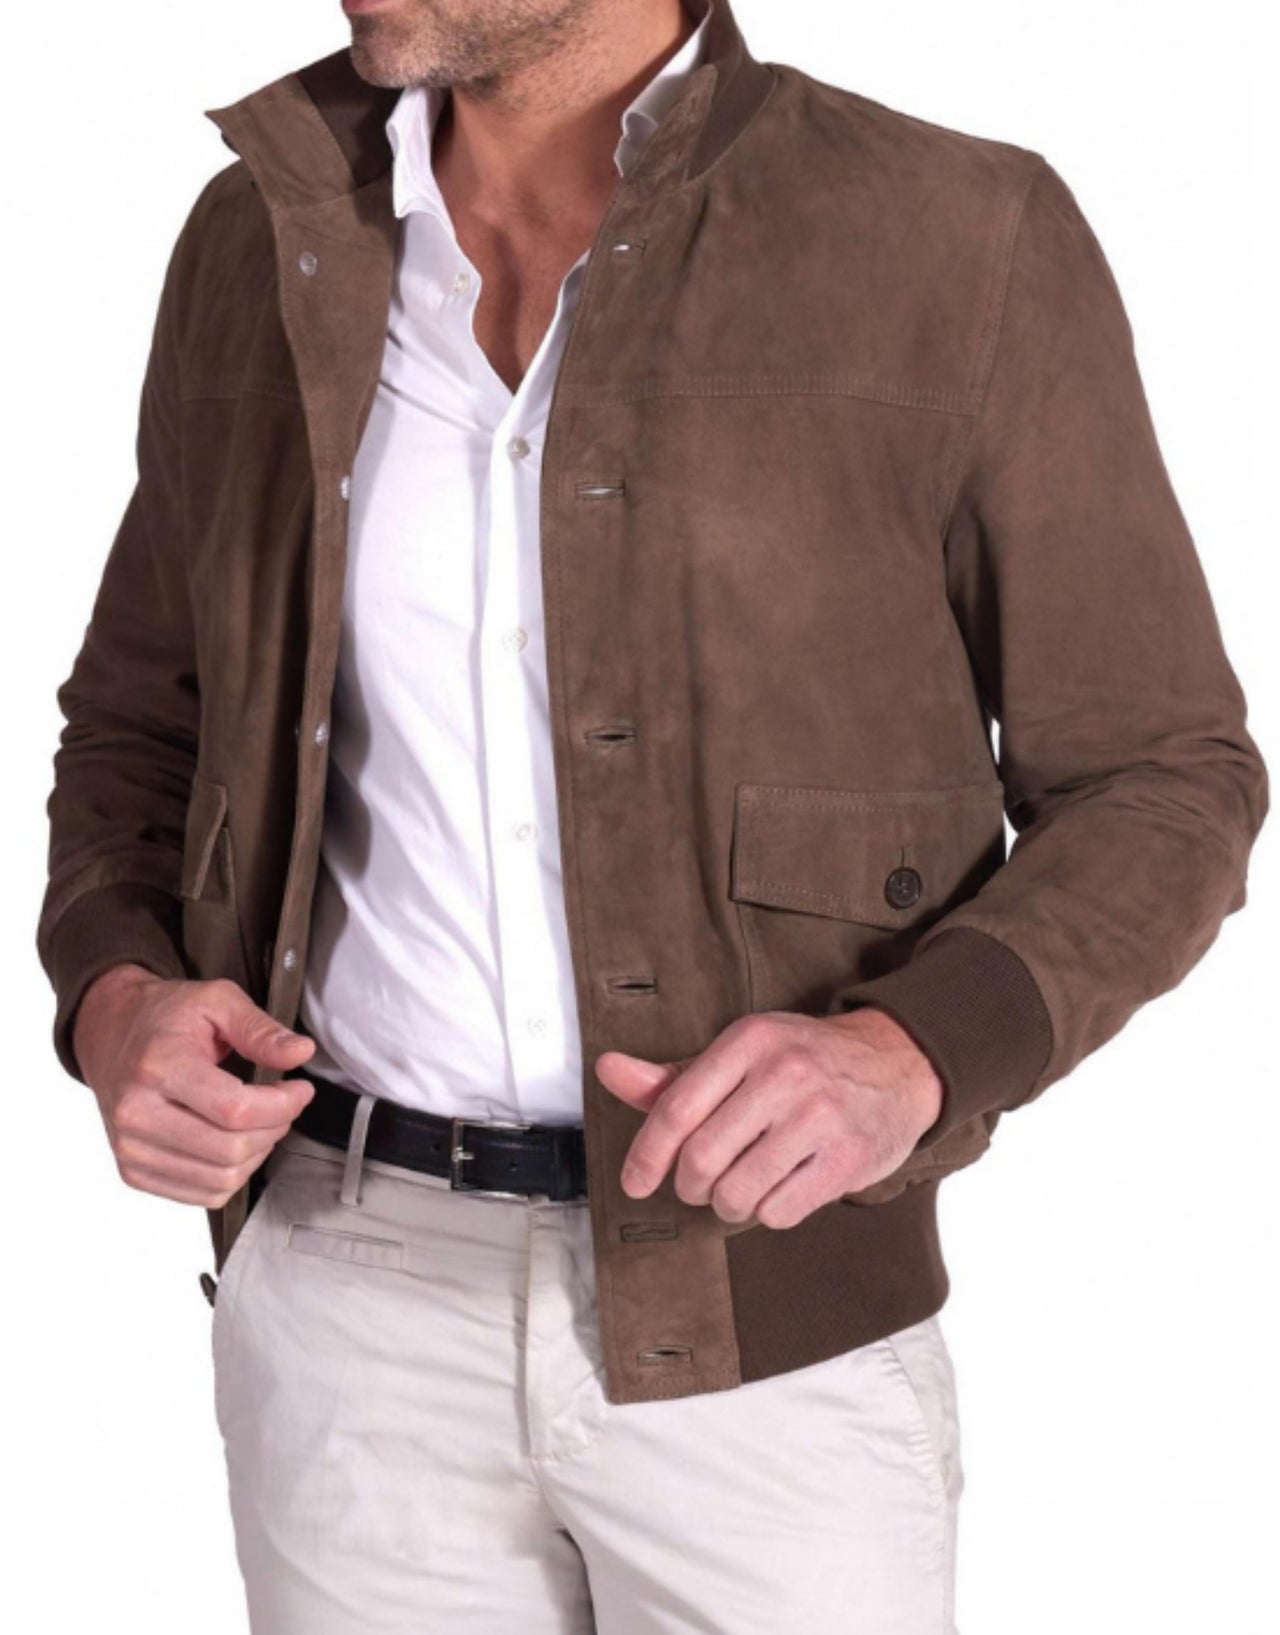 MCKINNON SUEDE LEATHER BUTTONED JACKET TAUPE